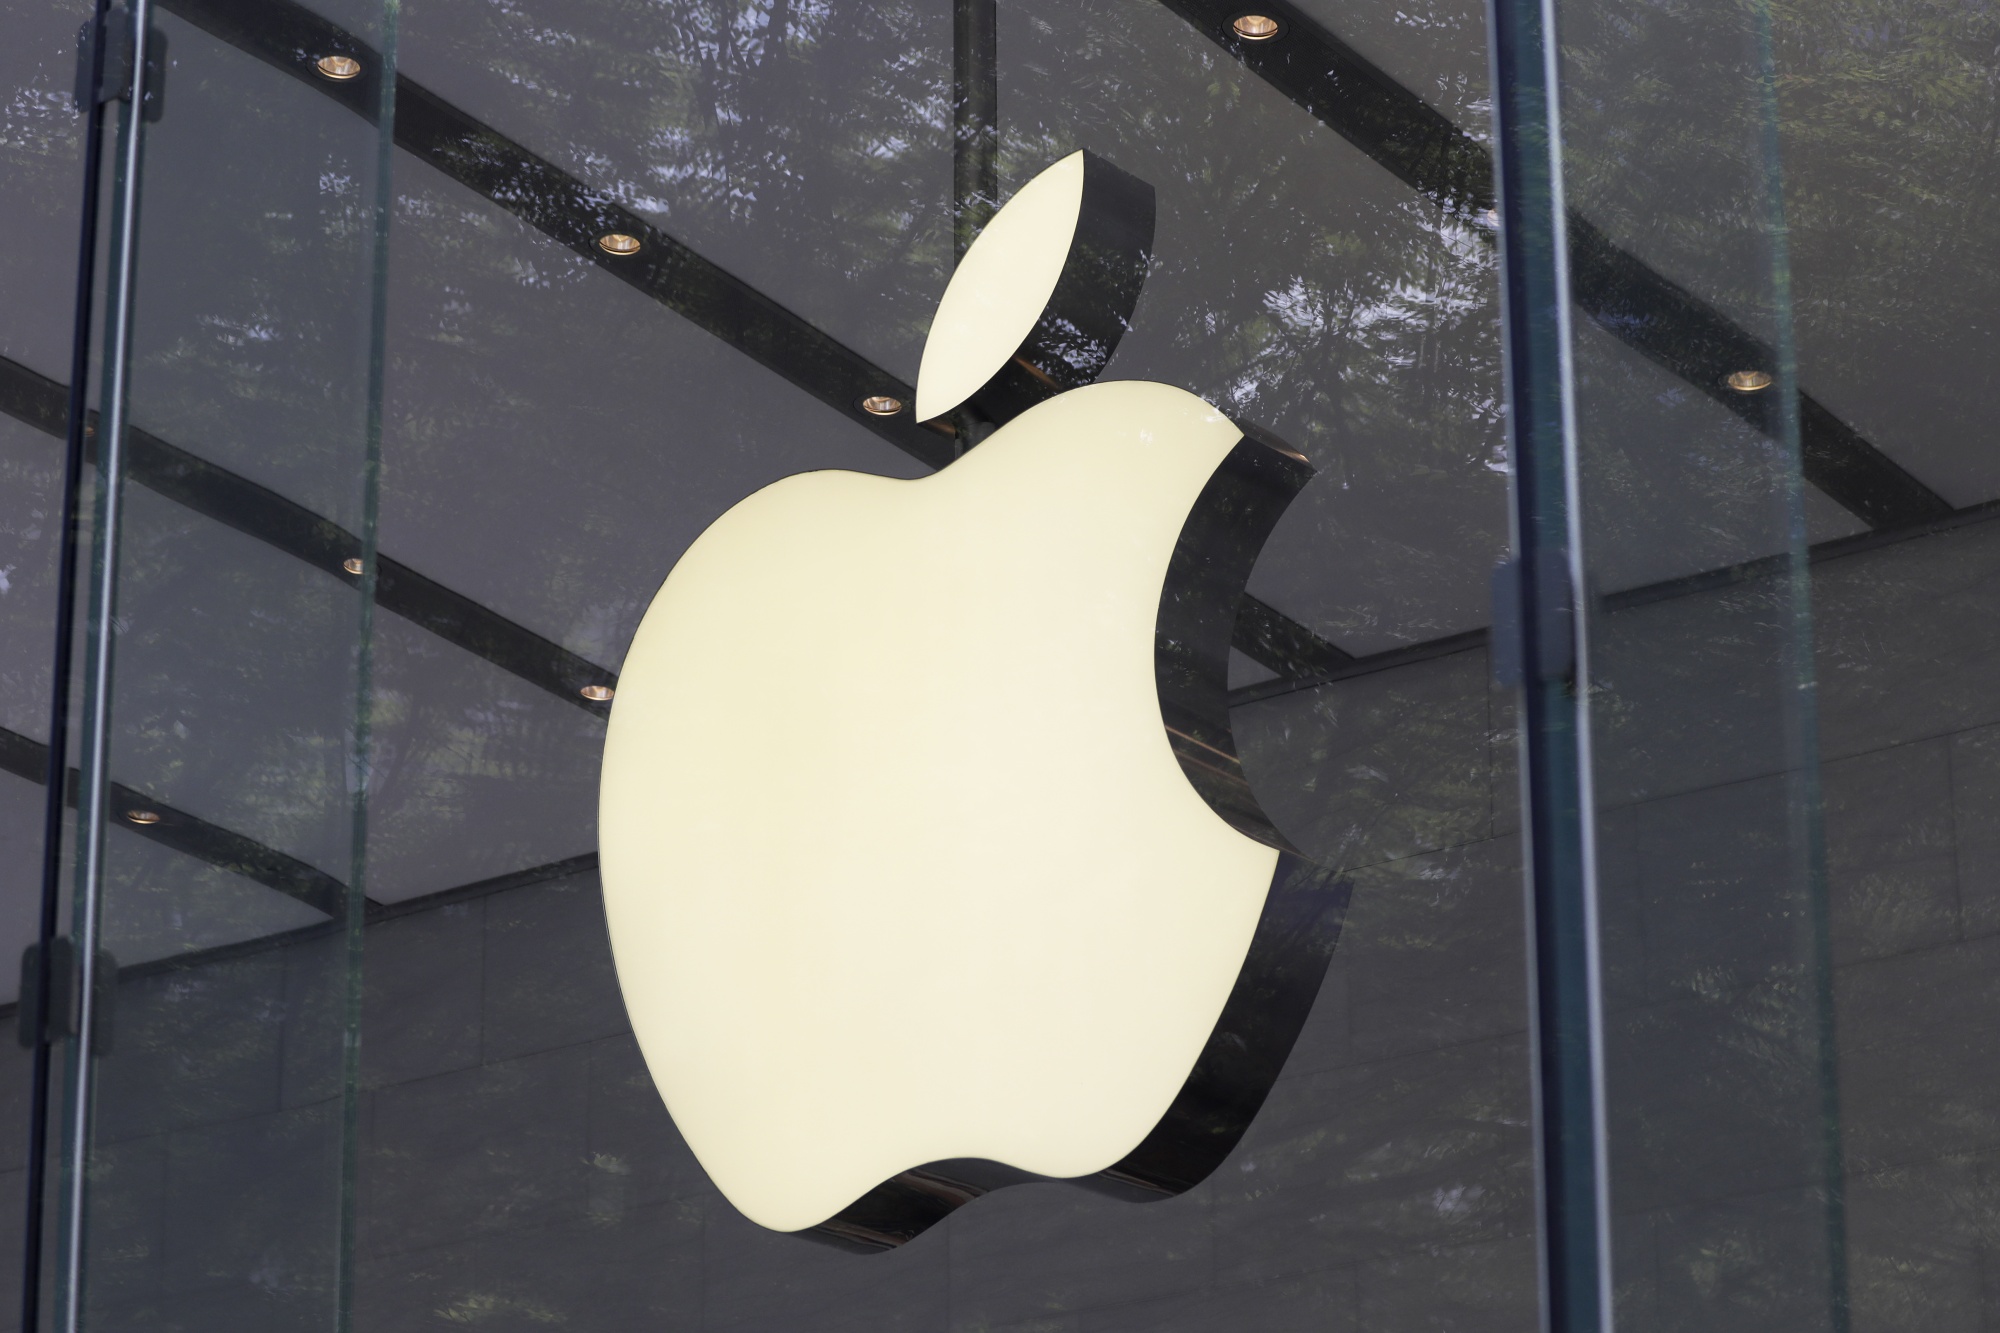 Apple shuts several retails stores in US due to Covid surge, HR